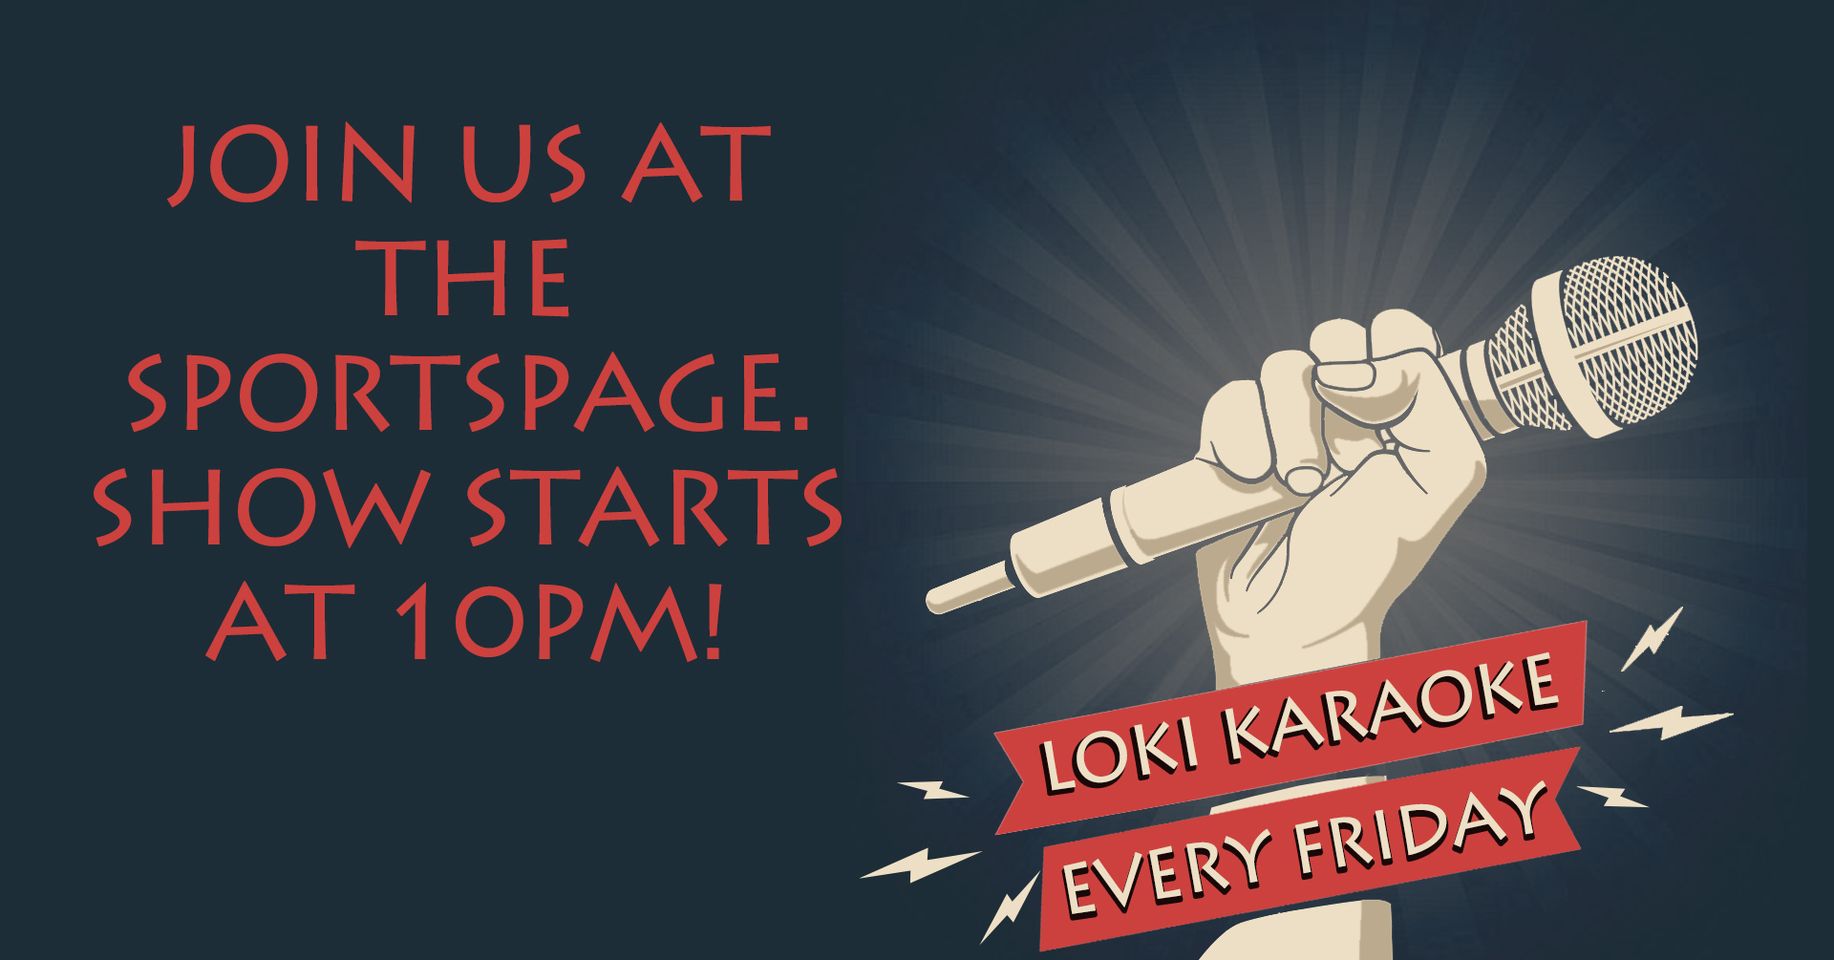 Loki Karaoke every Friday 10:00 pm to 1:00 am at The Sportspage Bowl Grill & Lounge in Polson, Montana